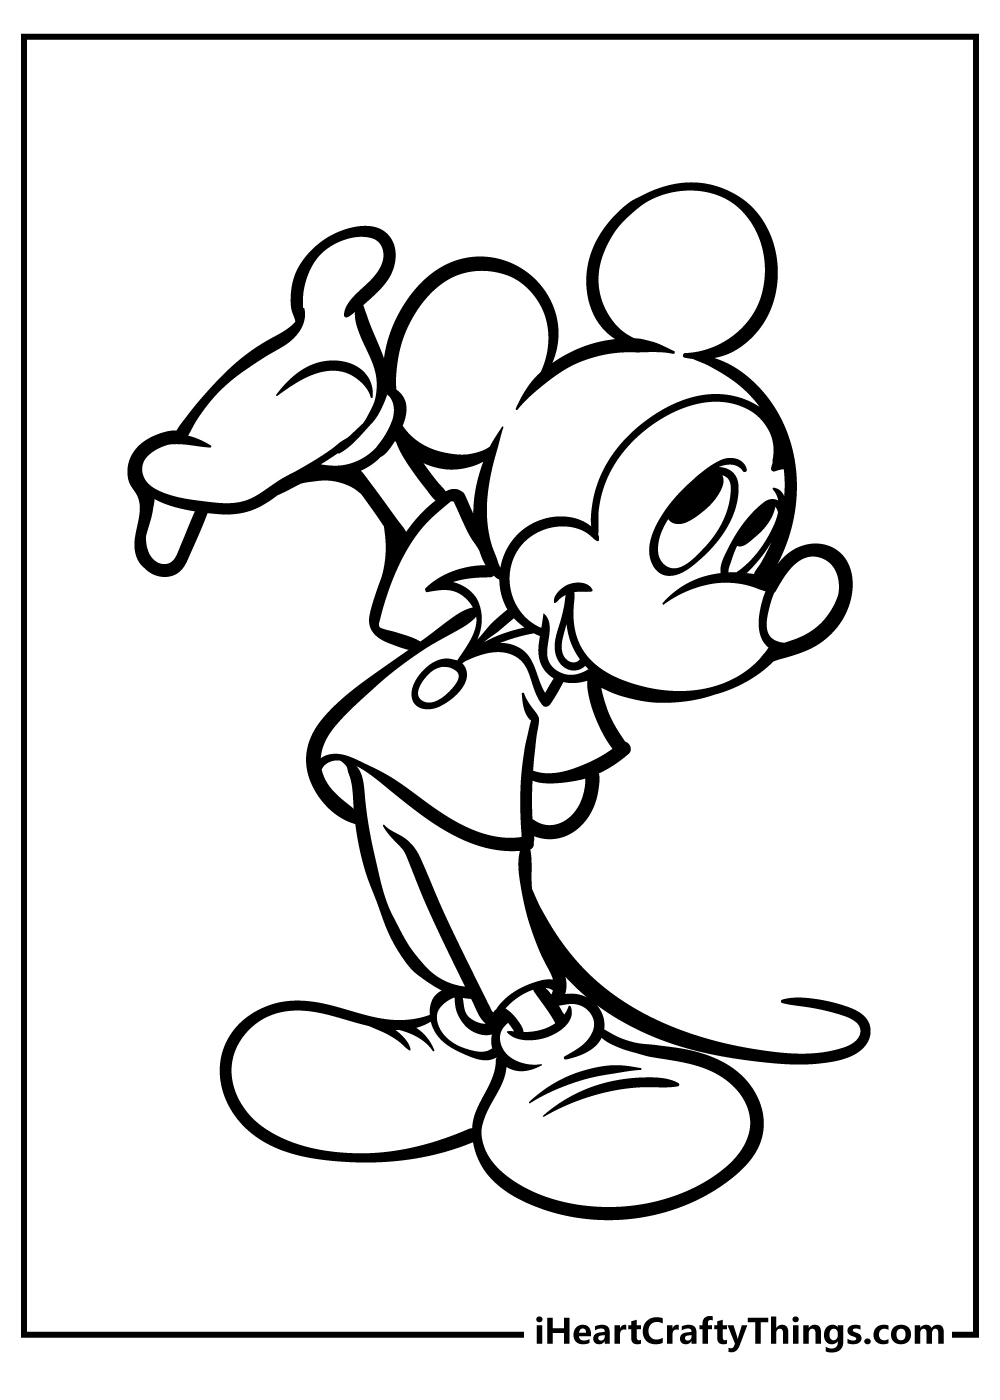 Mickey Mouse Coloring Sheet for children free download